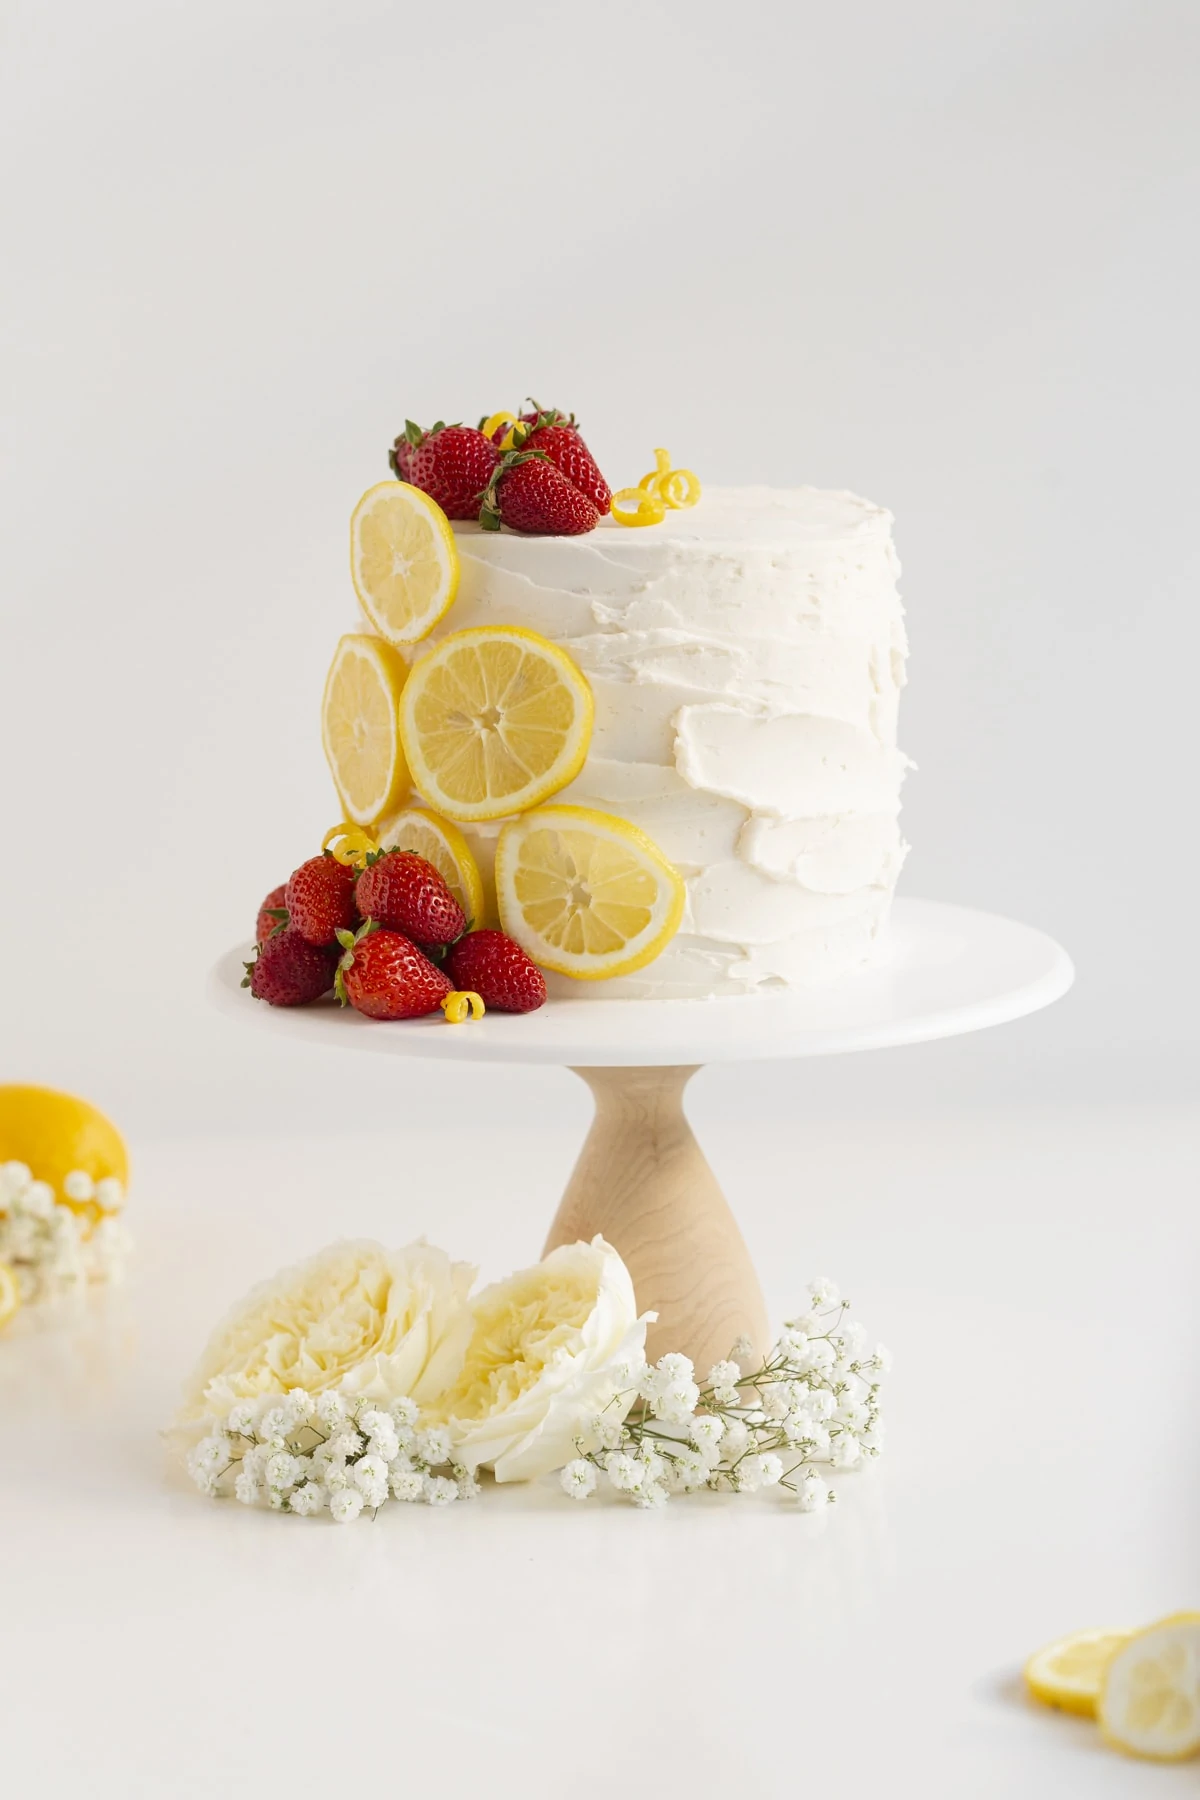 cake with strawberry filling on a cake stand with strawberries, lemons, and flowers